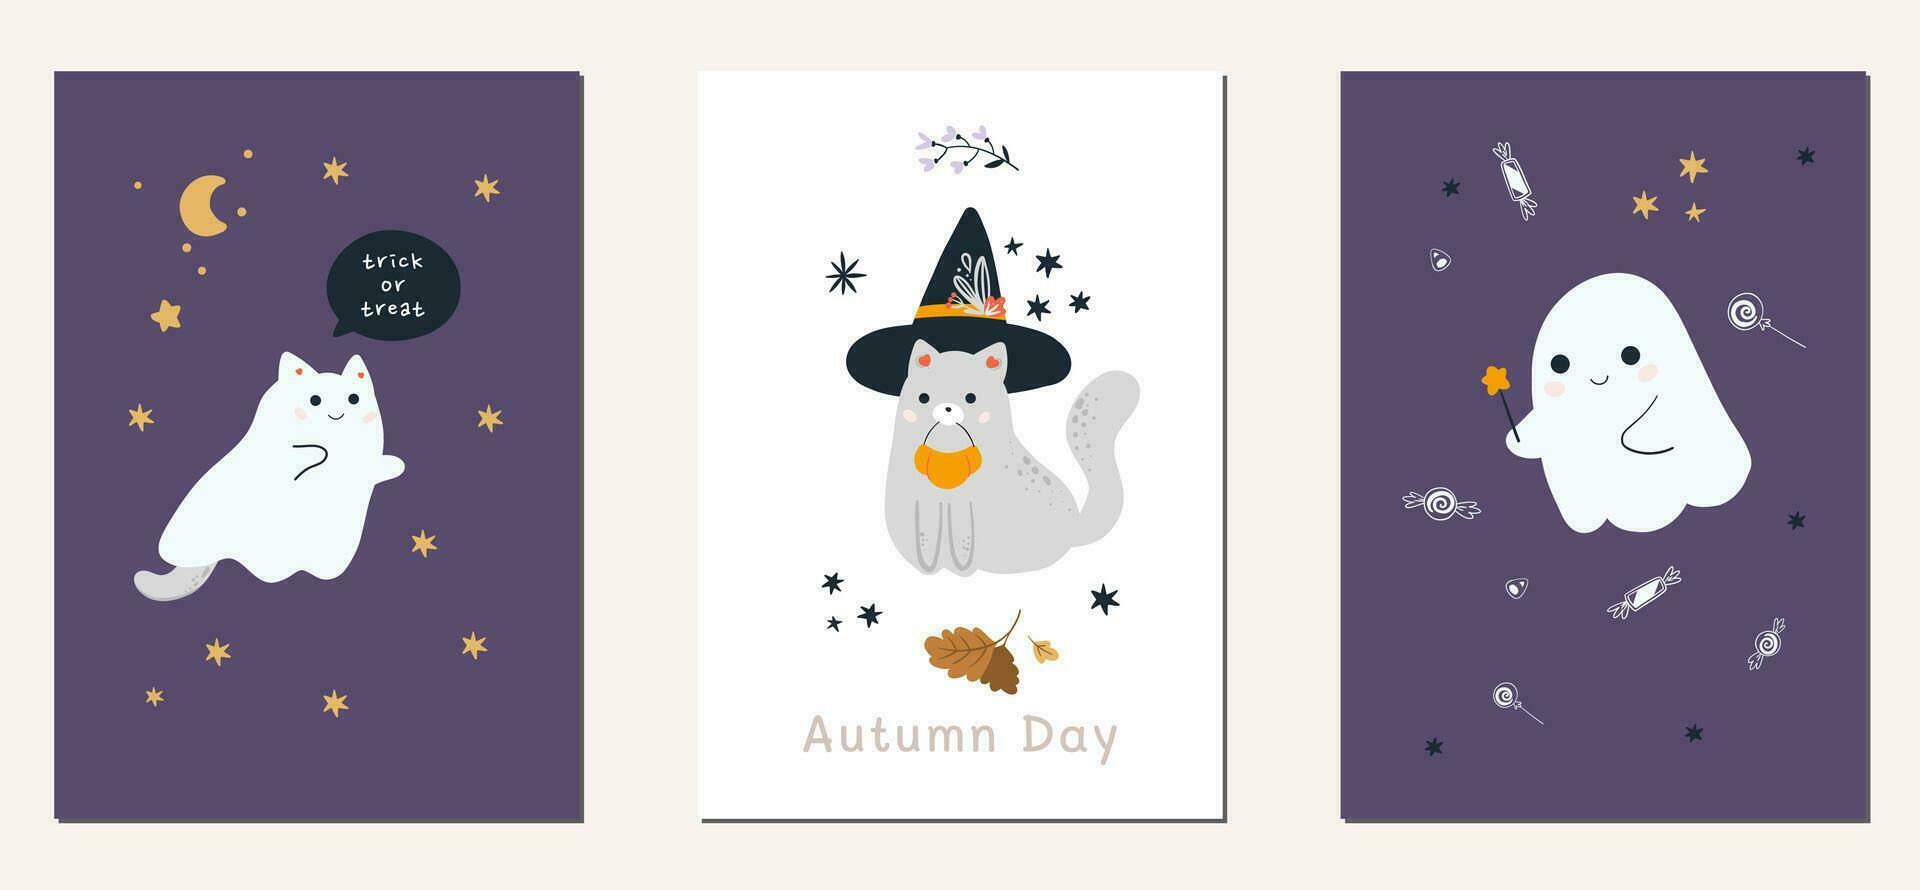 Set of cute ghosts and cats with pumpkins. Happy Halloween. Childish scary and smiling creepy characters. vector